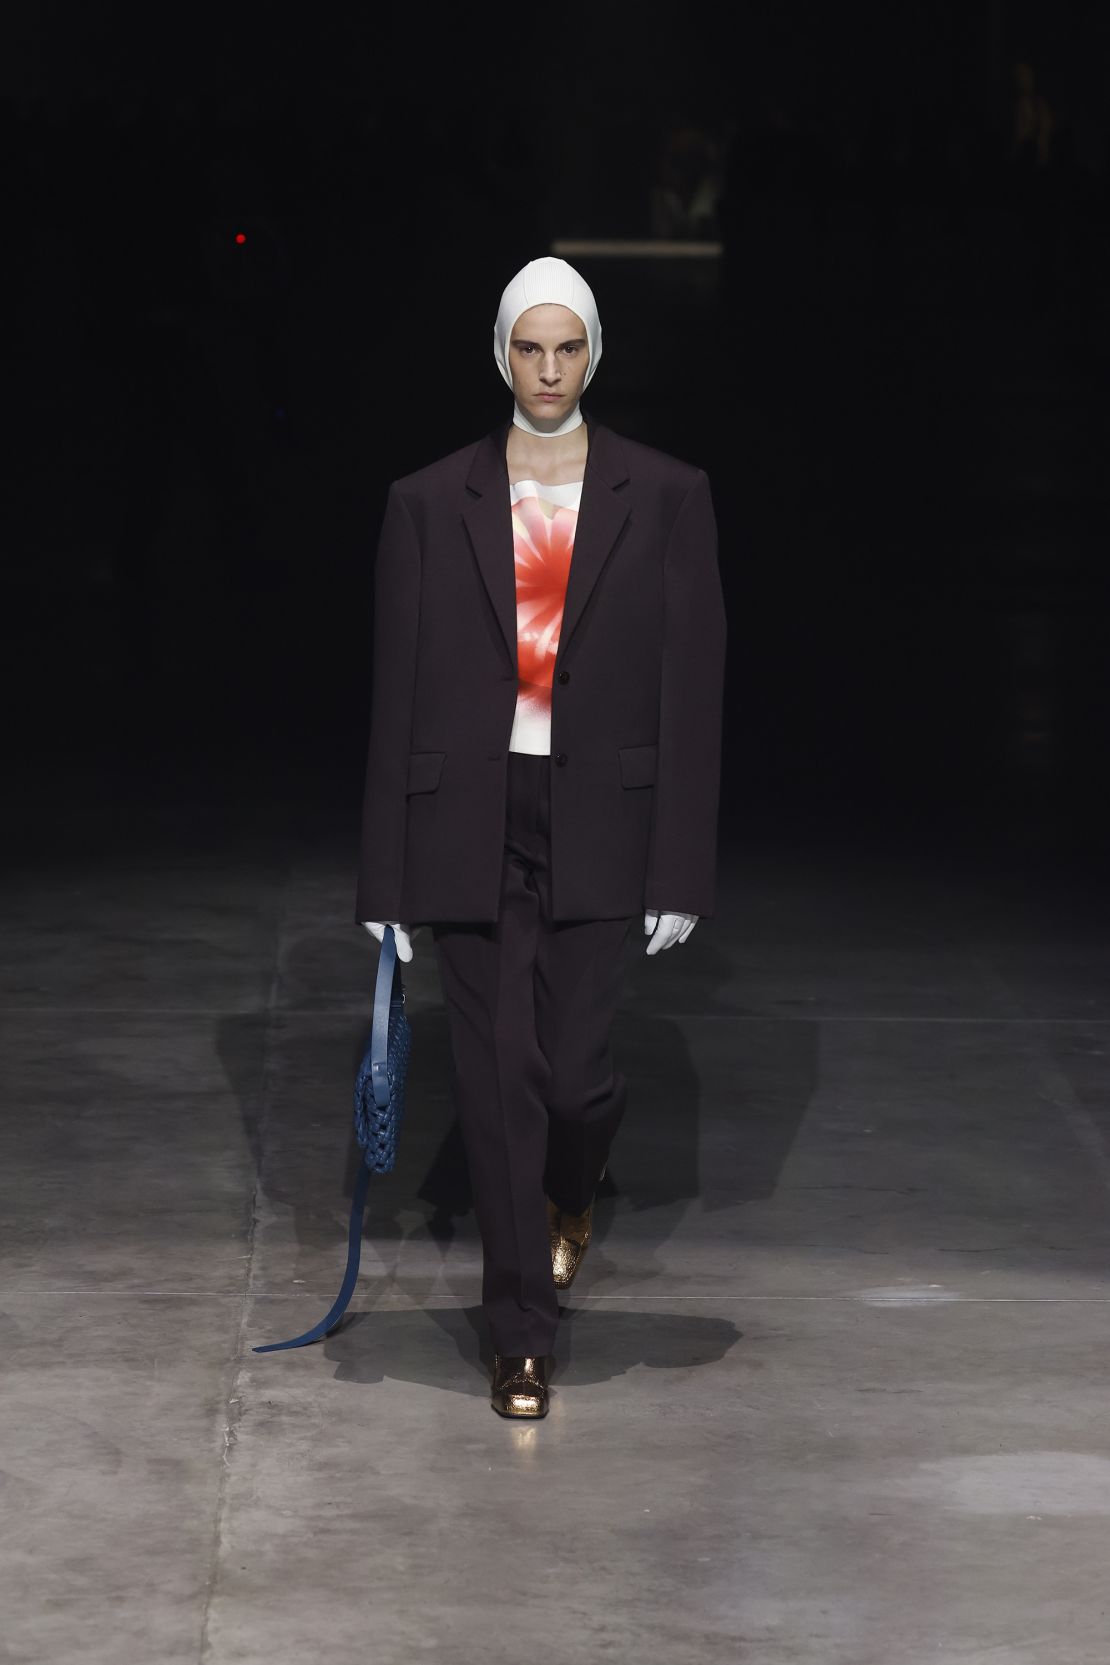 Distorted prints of cherries, bananas and boiled sweets were motifs in Jil Sander's latest collection.